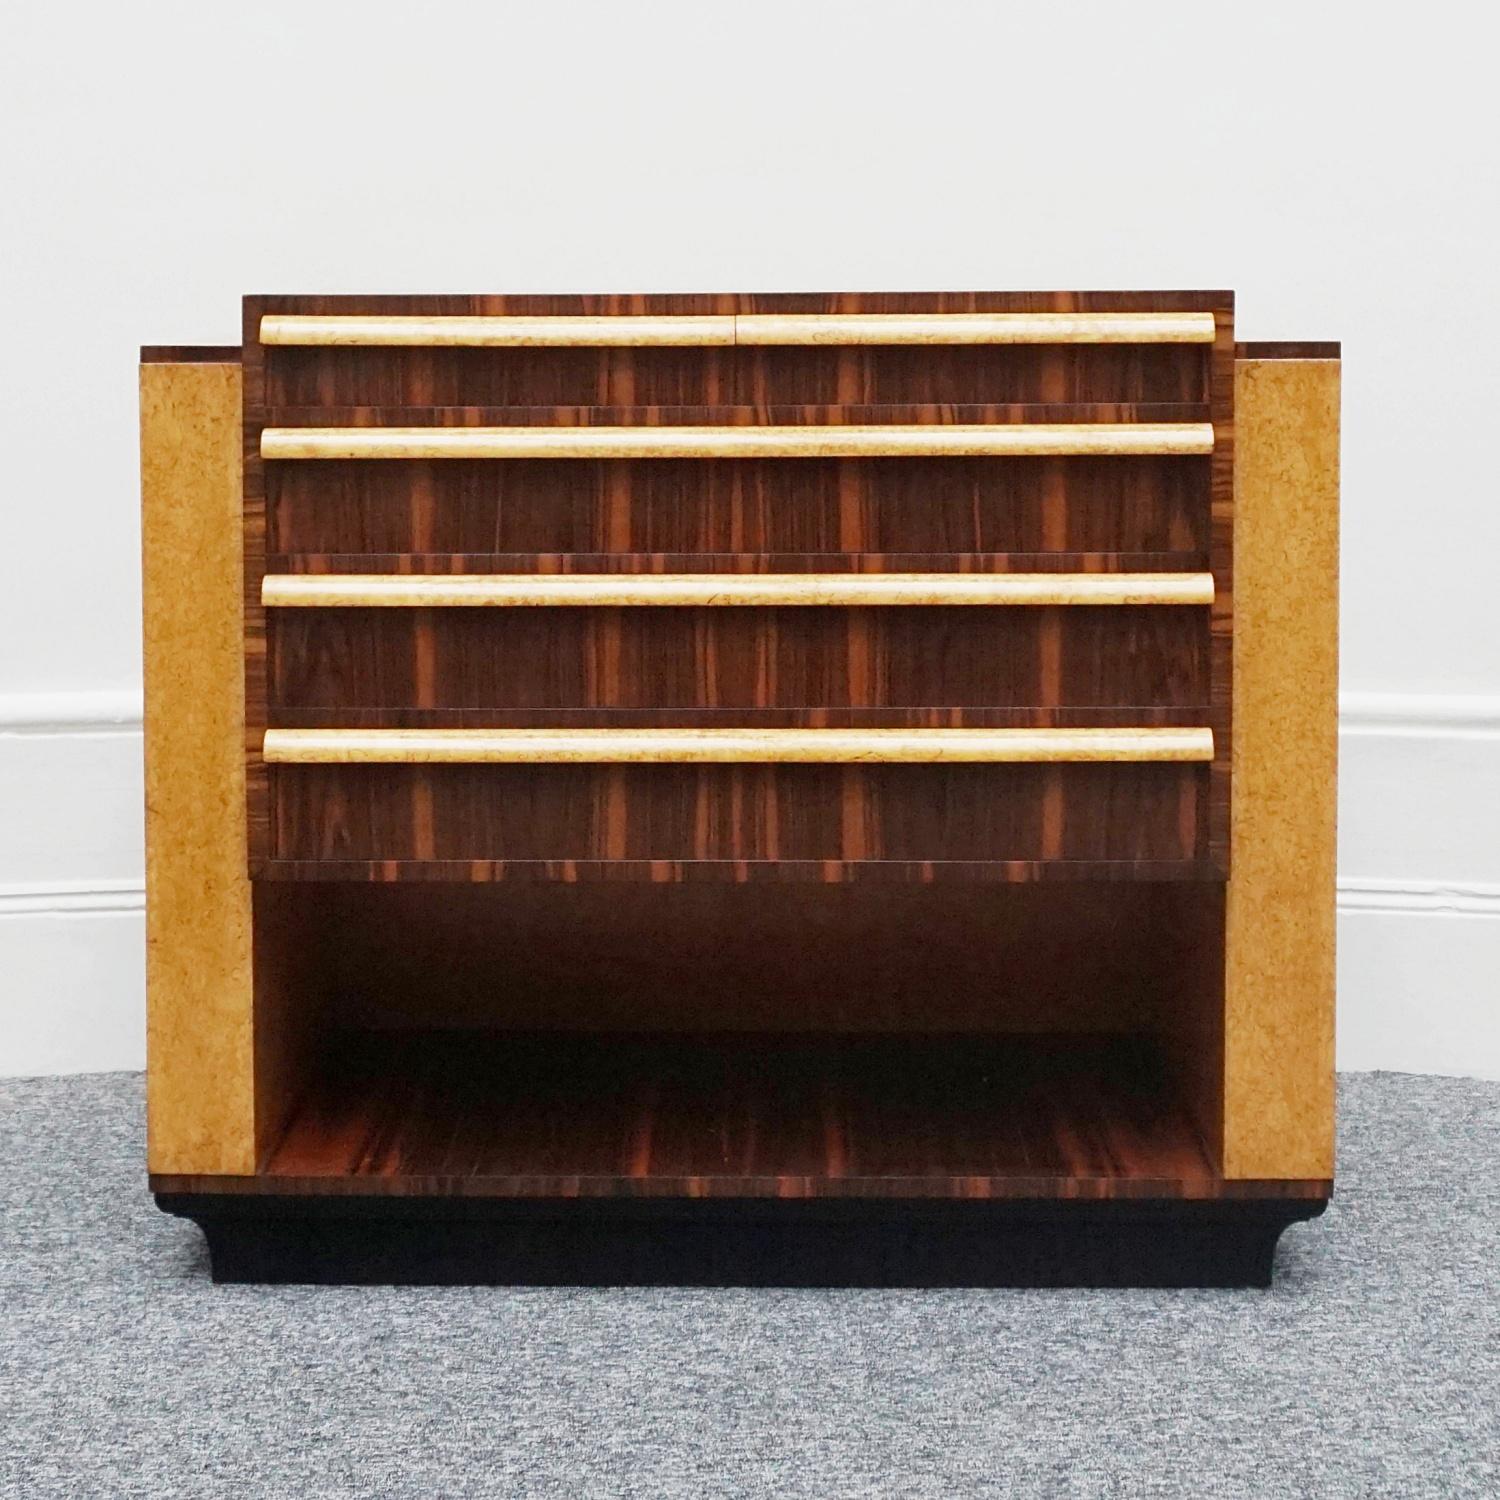 An Art Deco chest of drawers designed by Serge Ivan Chermayeff (1900-1995) for Waring & Gillows. Karelian birch and Macassar ebony veneered. Five upper drawers with a lower open shelf. Waring & Gillows stamp to inside of upper left drawer.